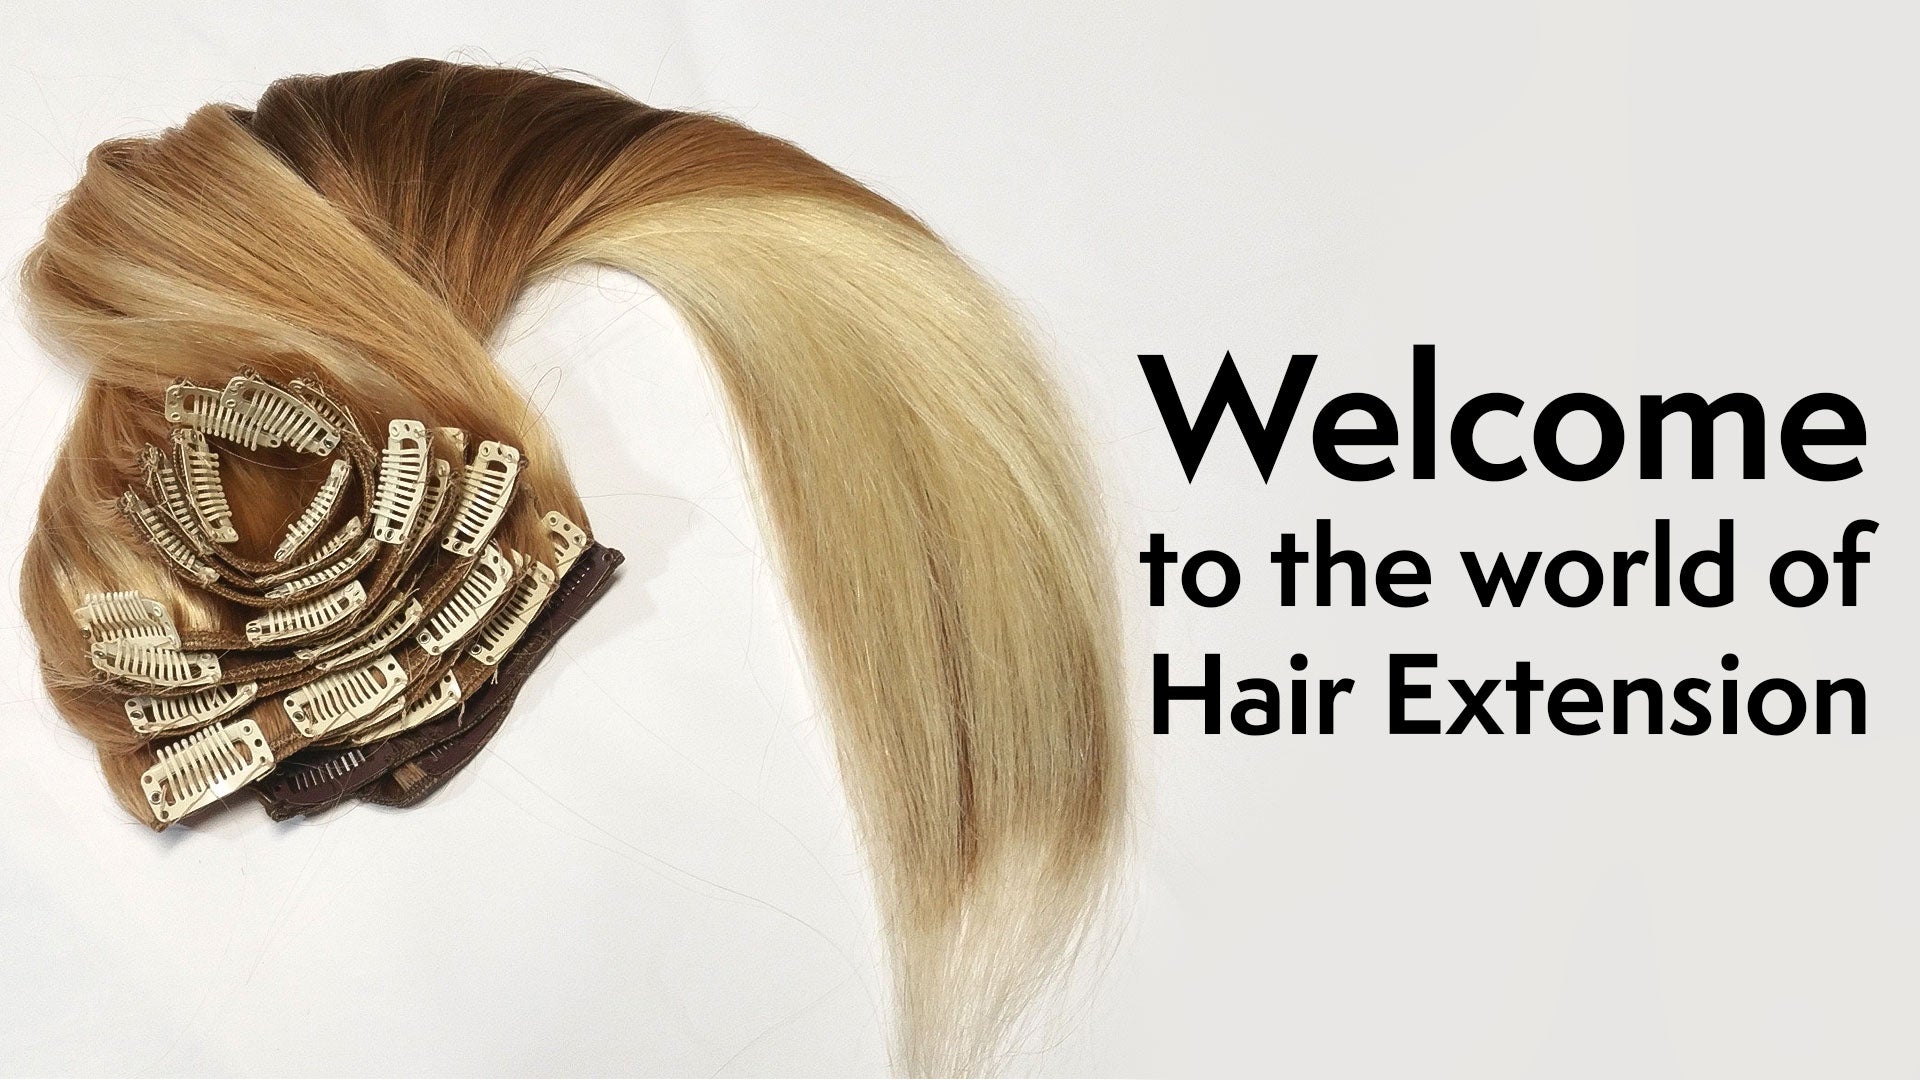 Hair Extensions - An Introduction